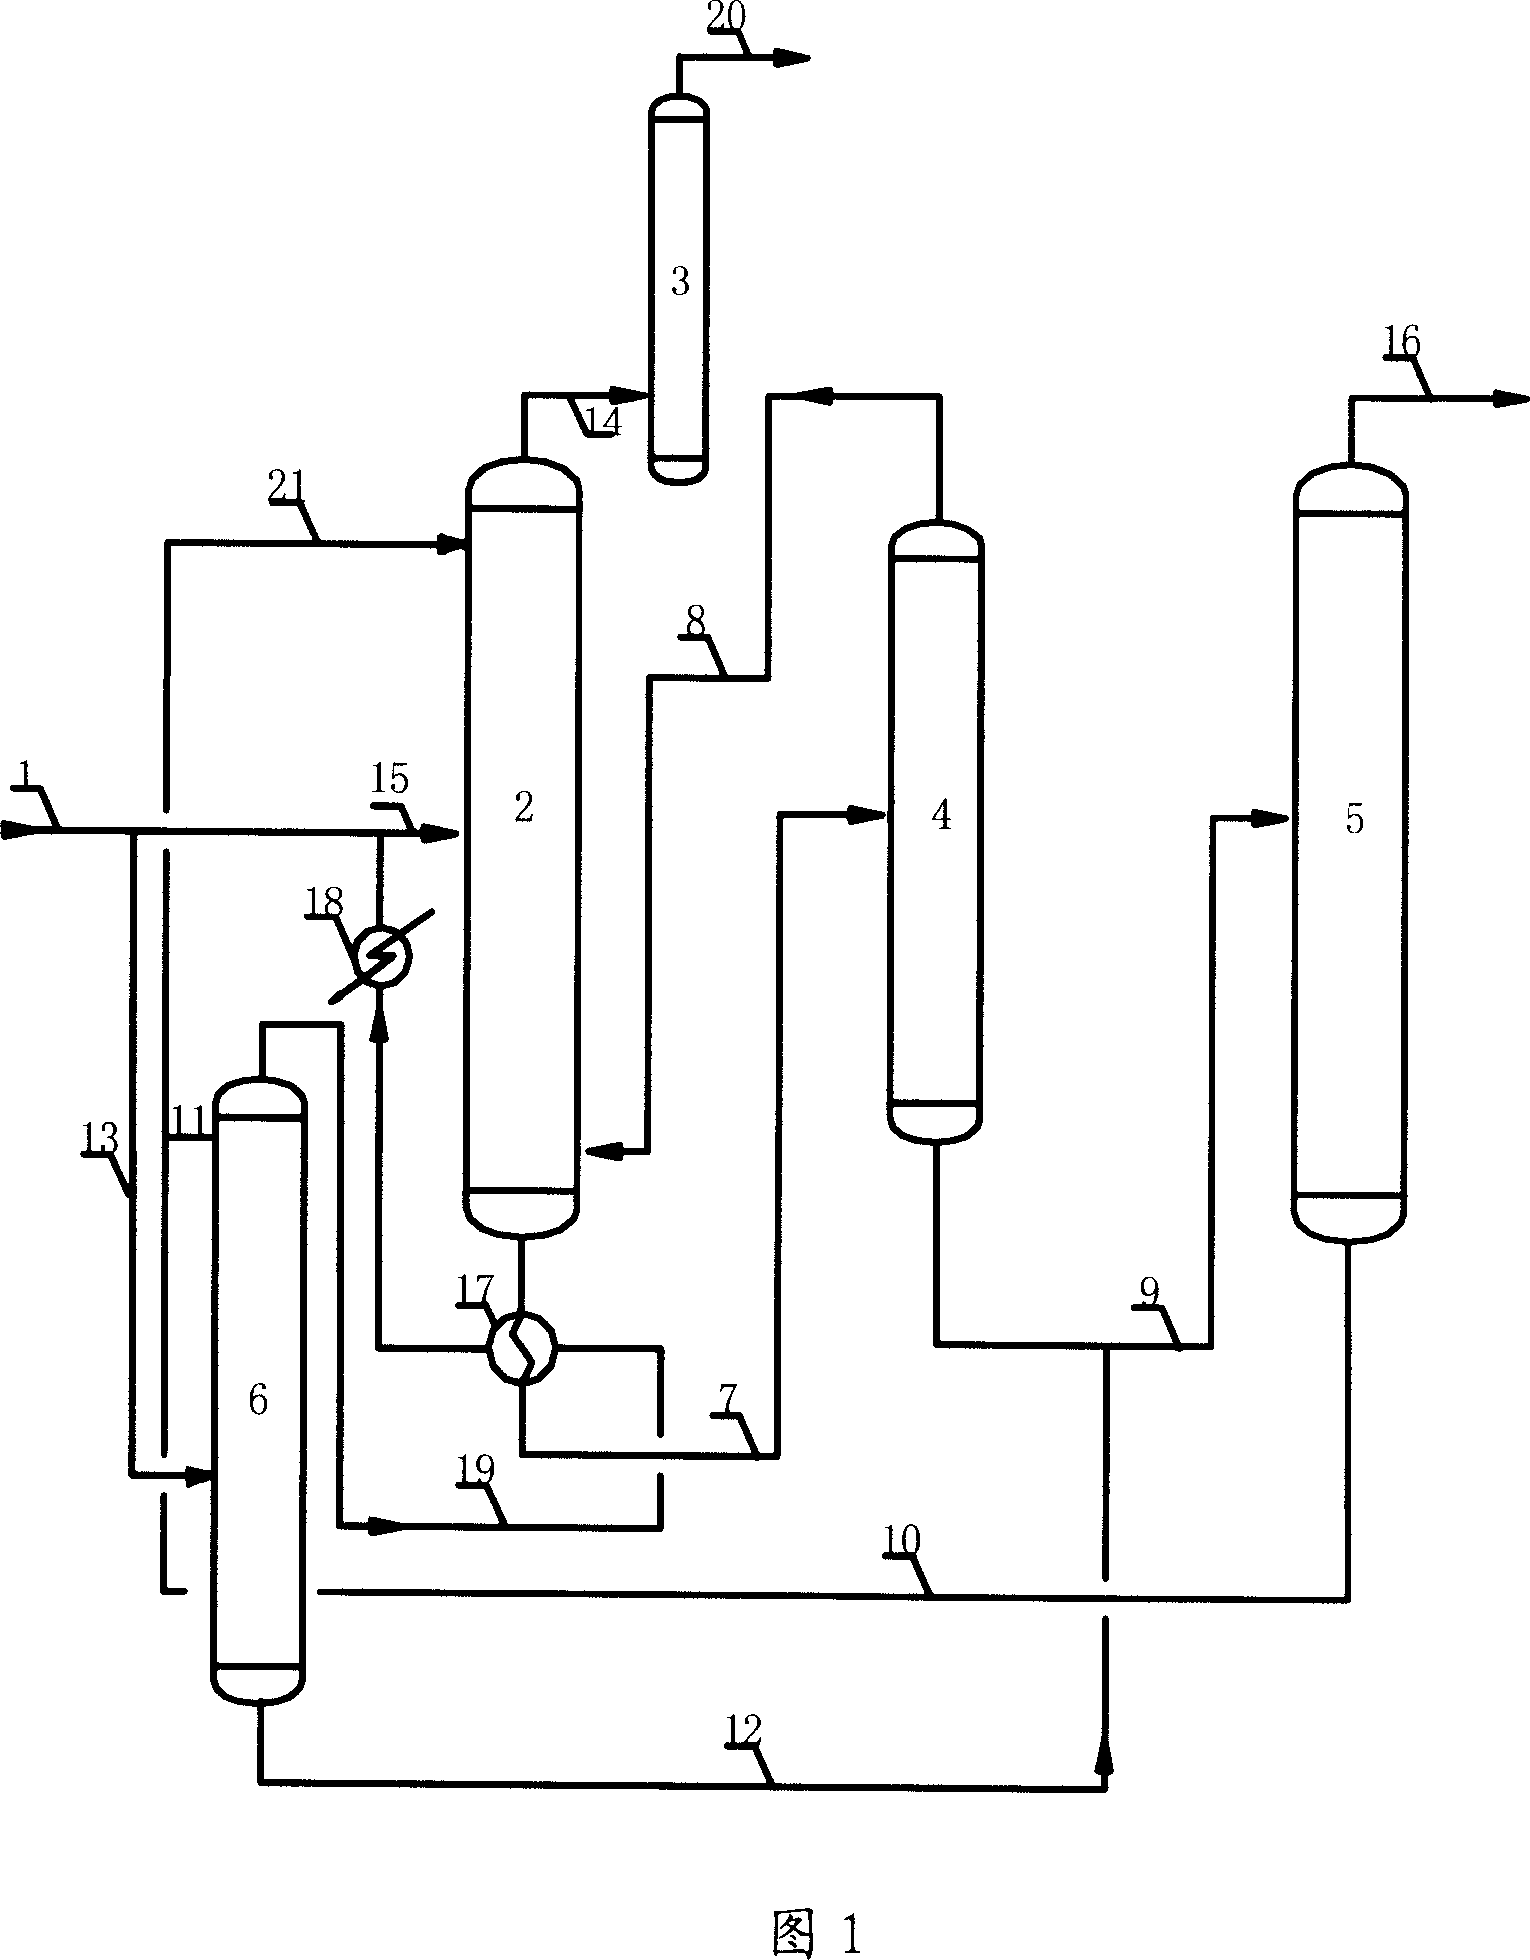 Method for recovering aromatic hydrocarbons from hydrocarbons mixture with high content of aromatic hydrocarbons